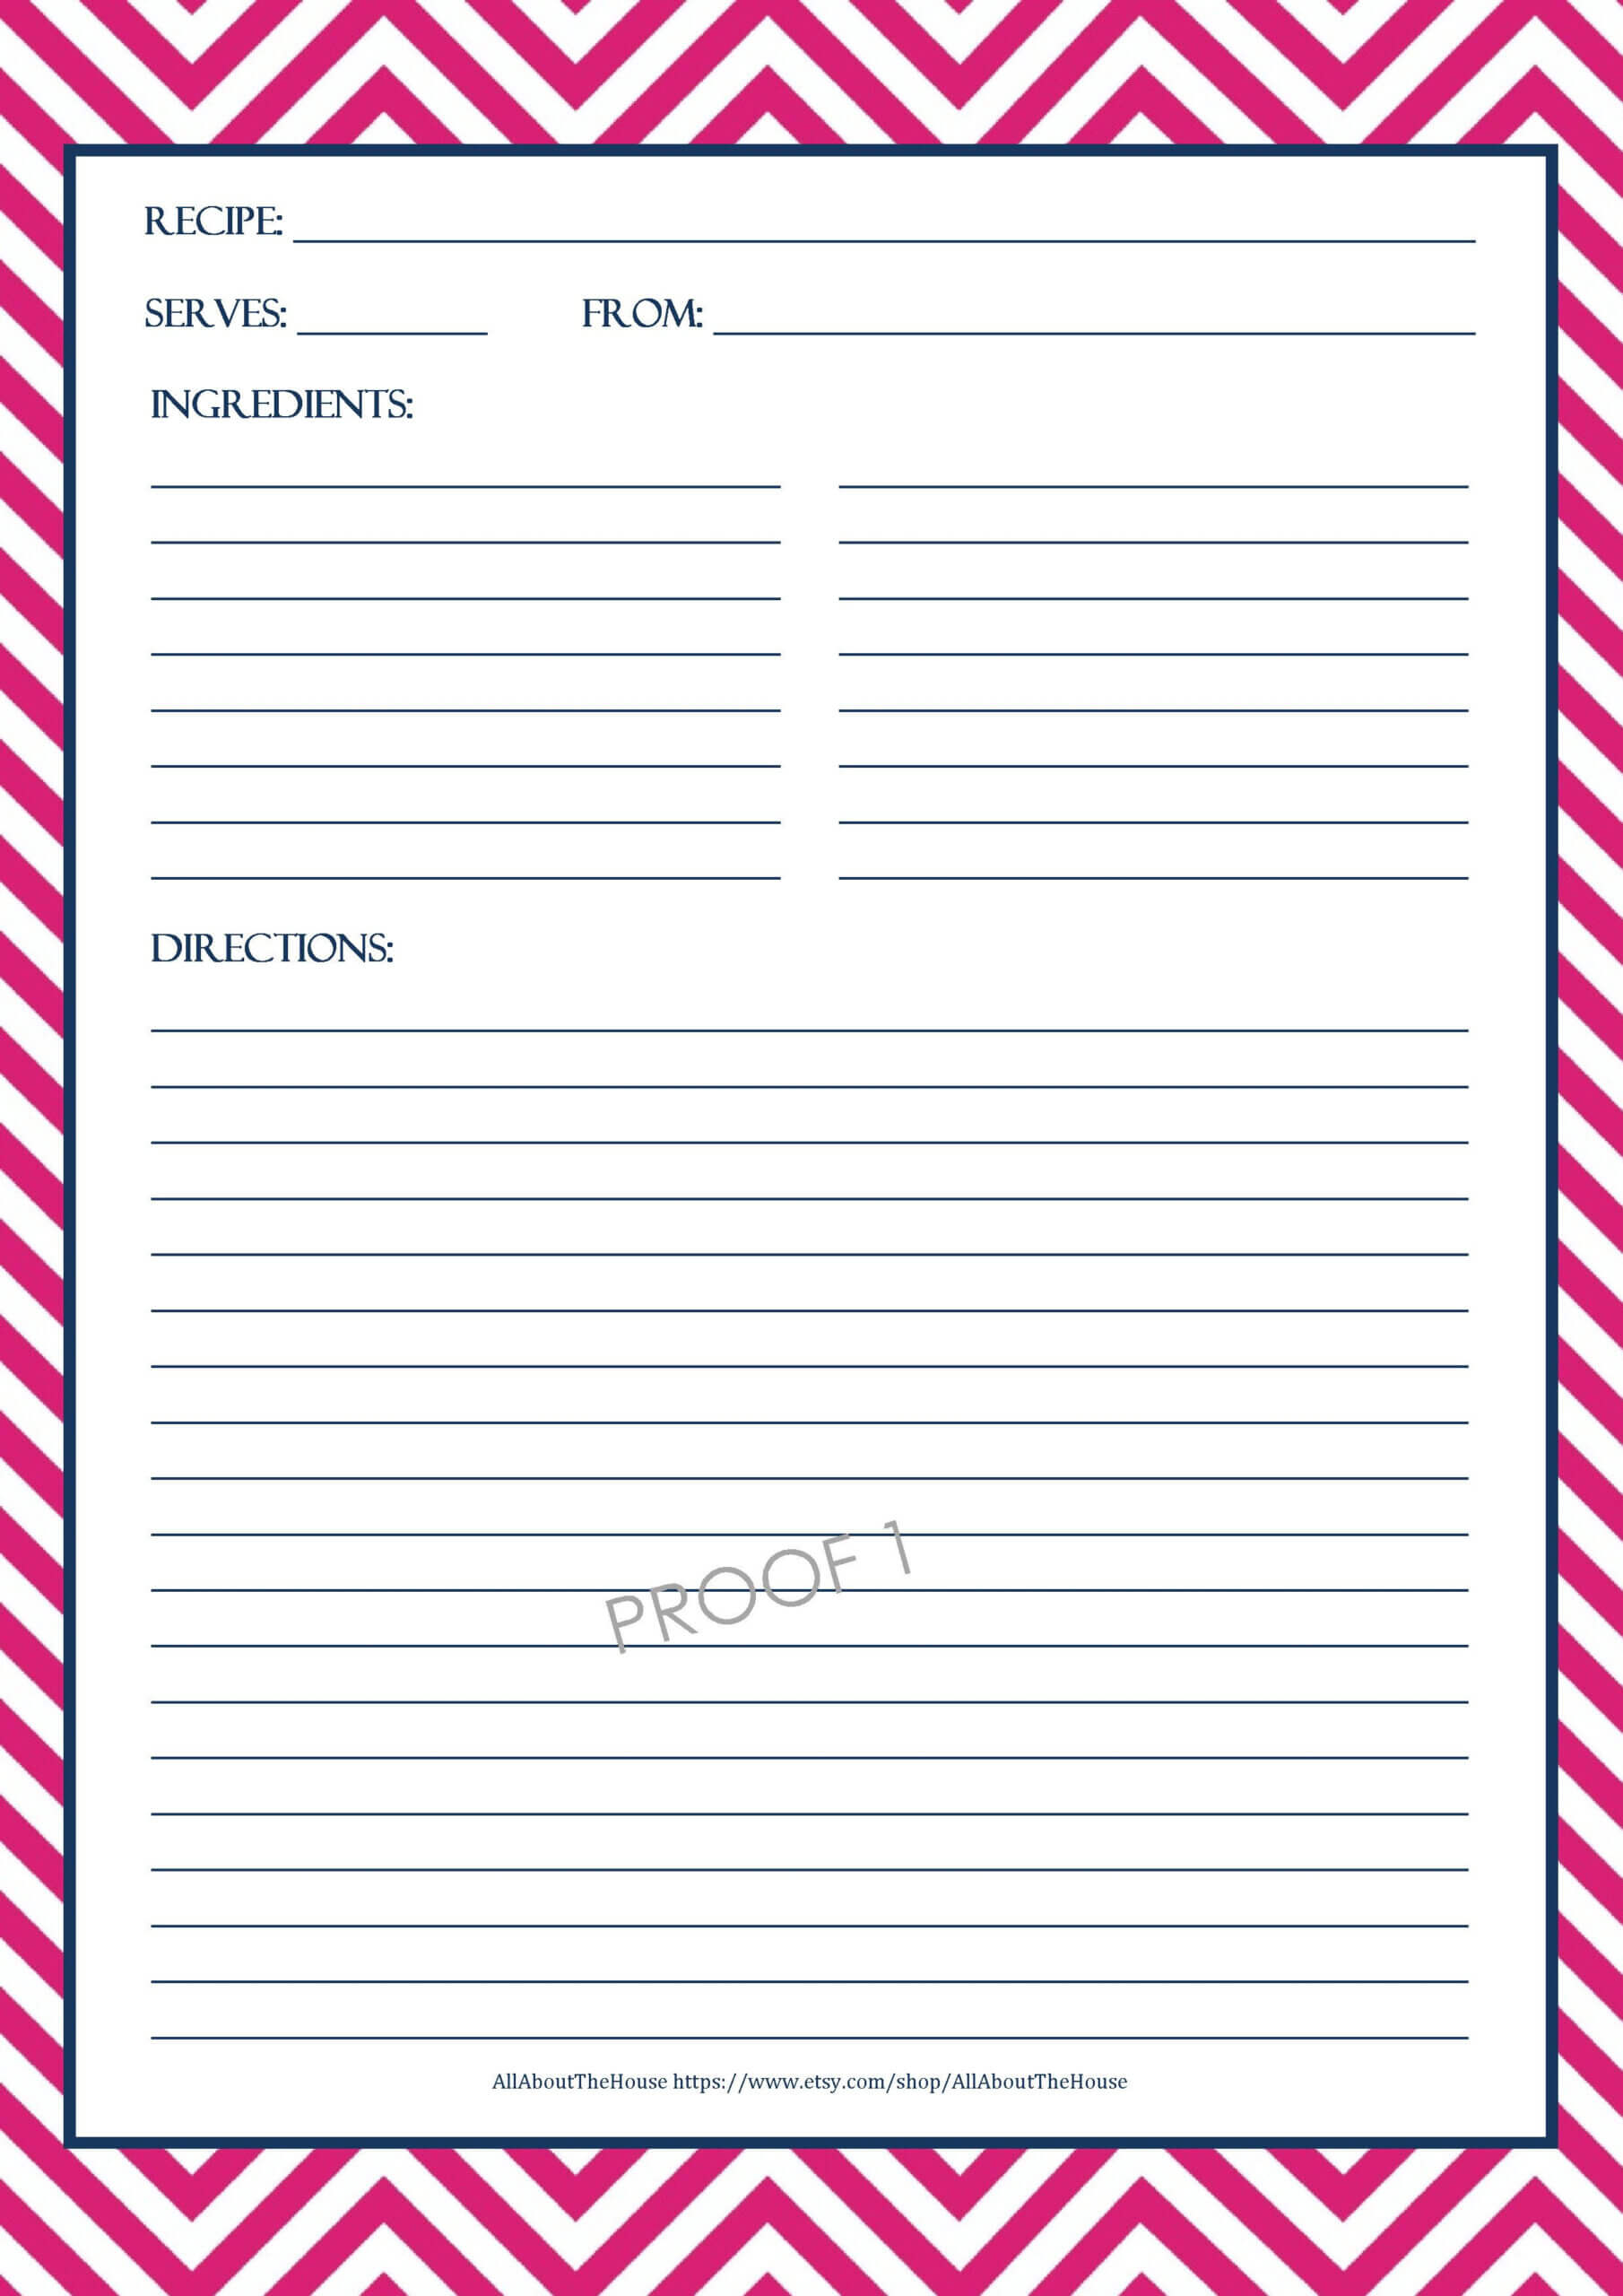 024 Recipe Card Template For Word Free Ideas Unbelievable Throughout Free Recipe Card Templates For Microsoft Word